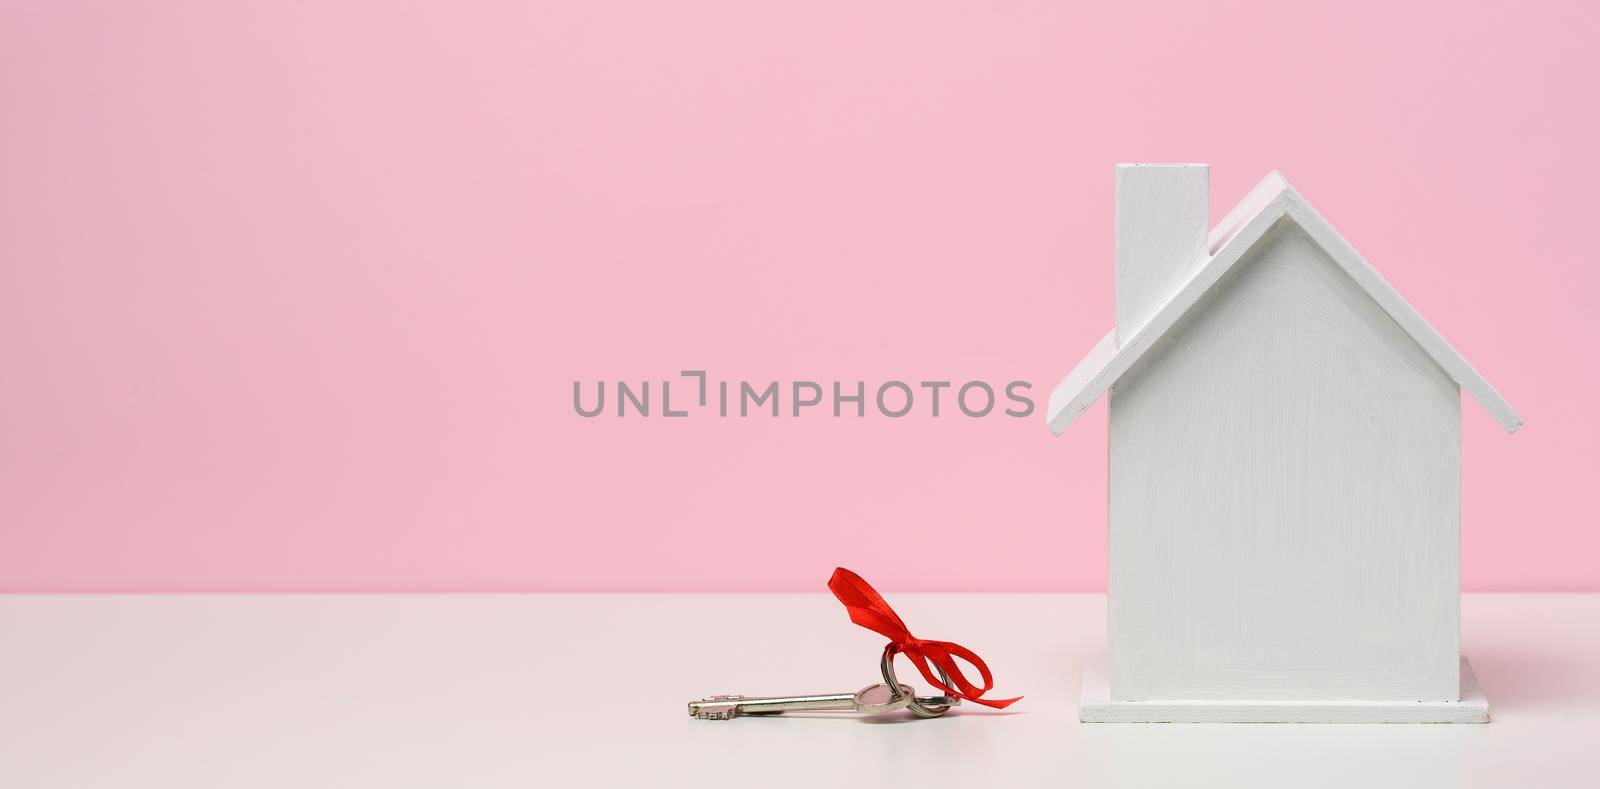 wooden house on a pink background. Real estate rental, purchase and sale concept. Realtor services, building repair and maintenance, by ndanko